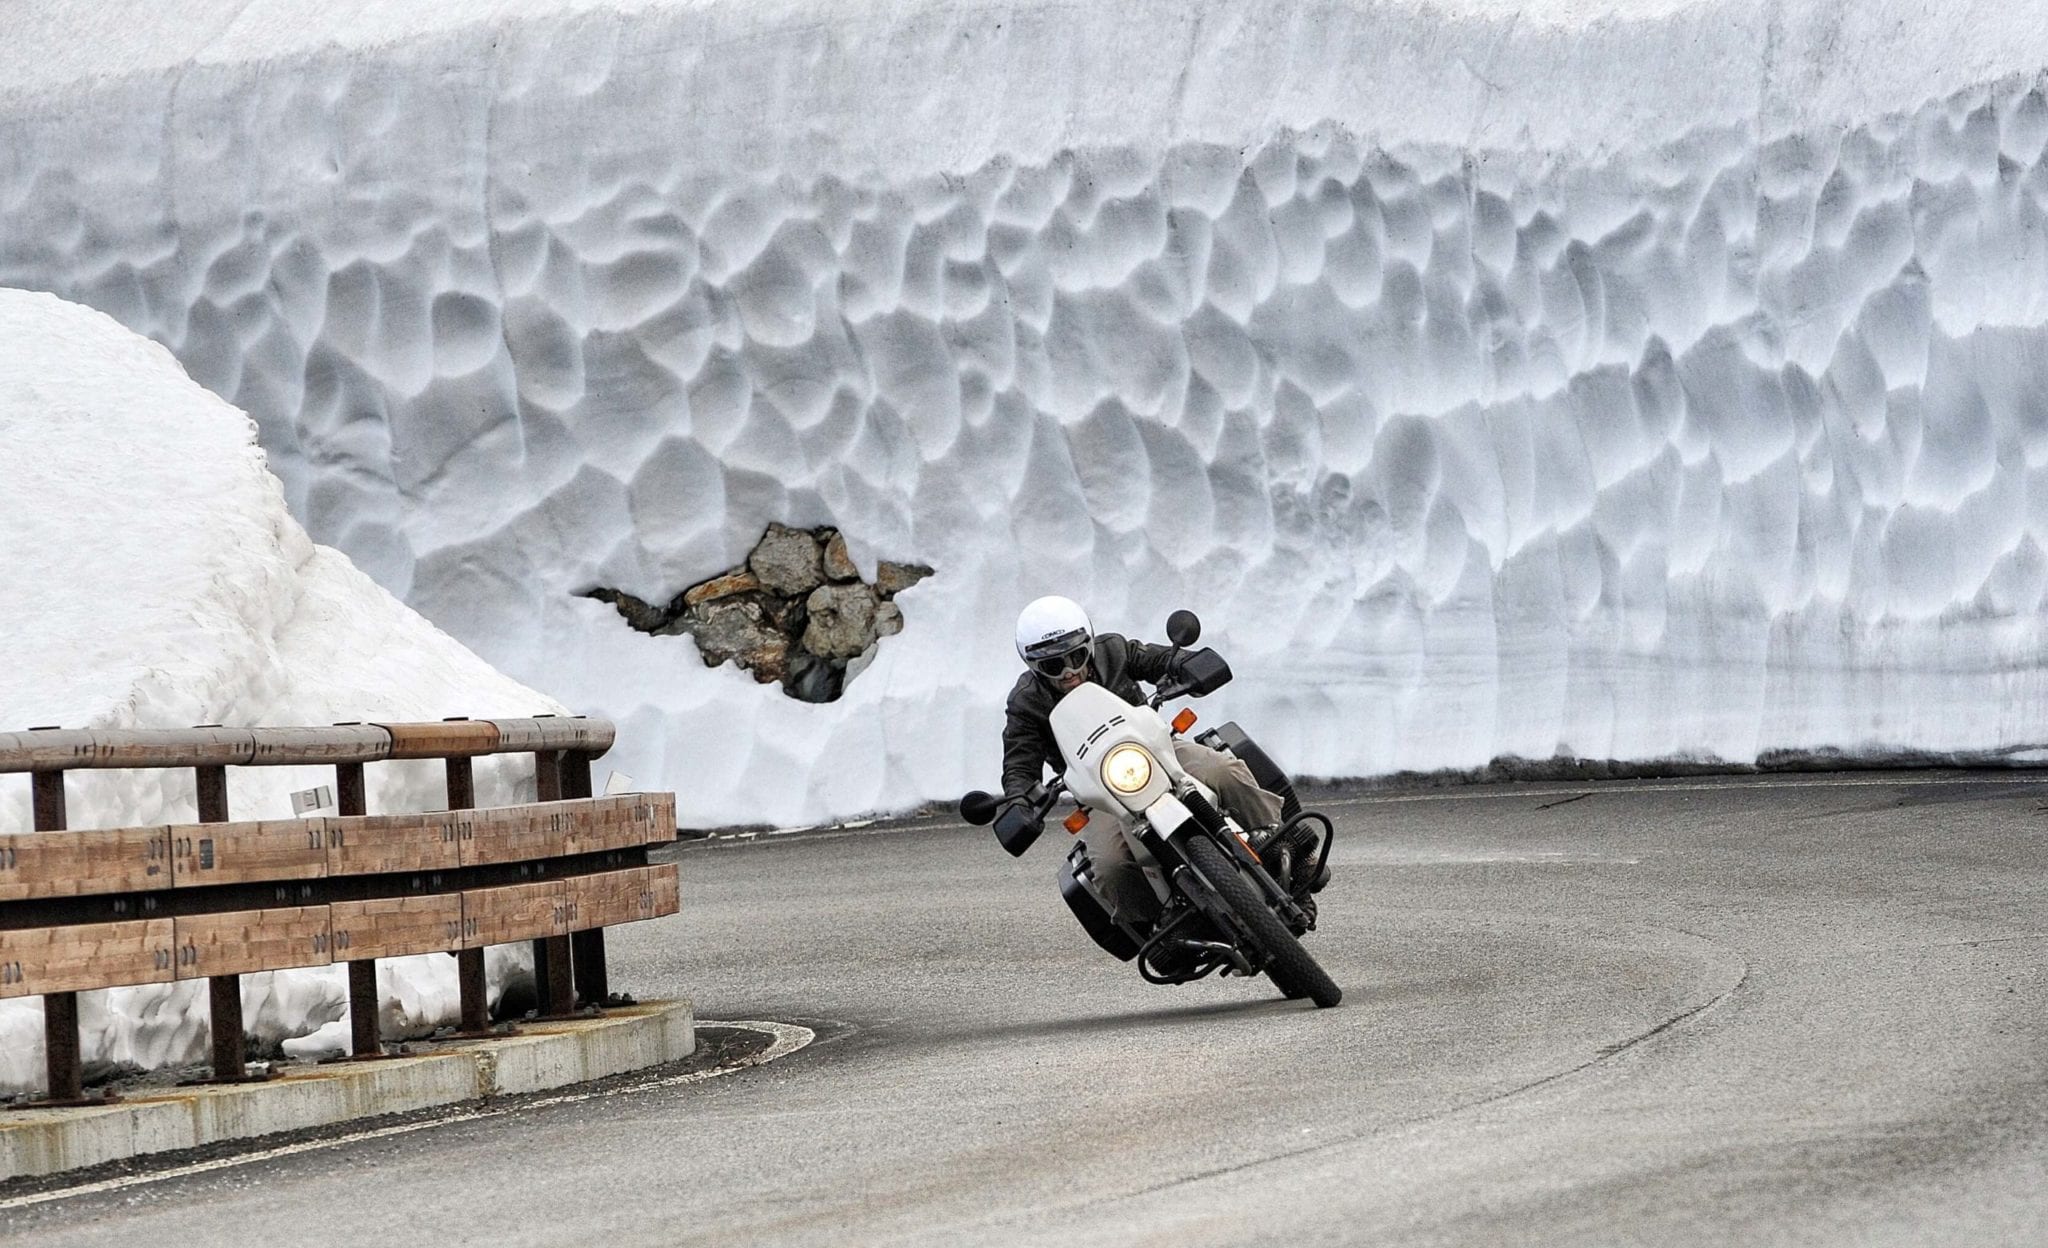 Riding Your Motorcycle in Winter Weather